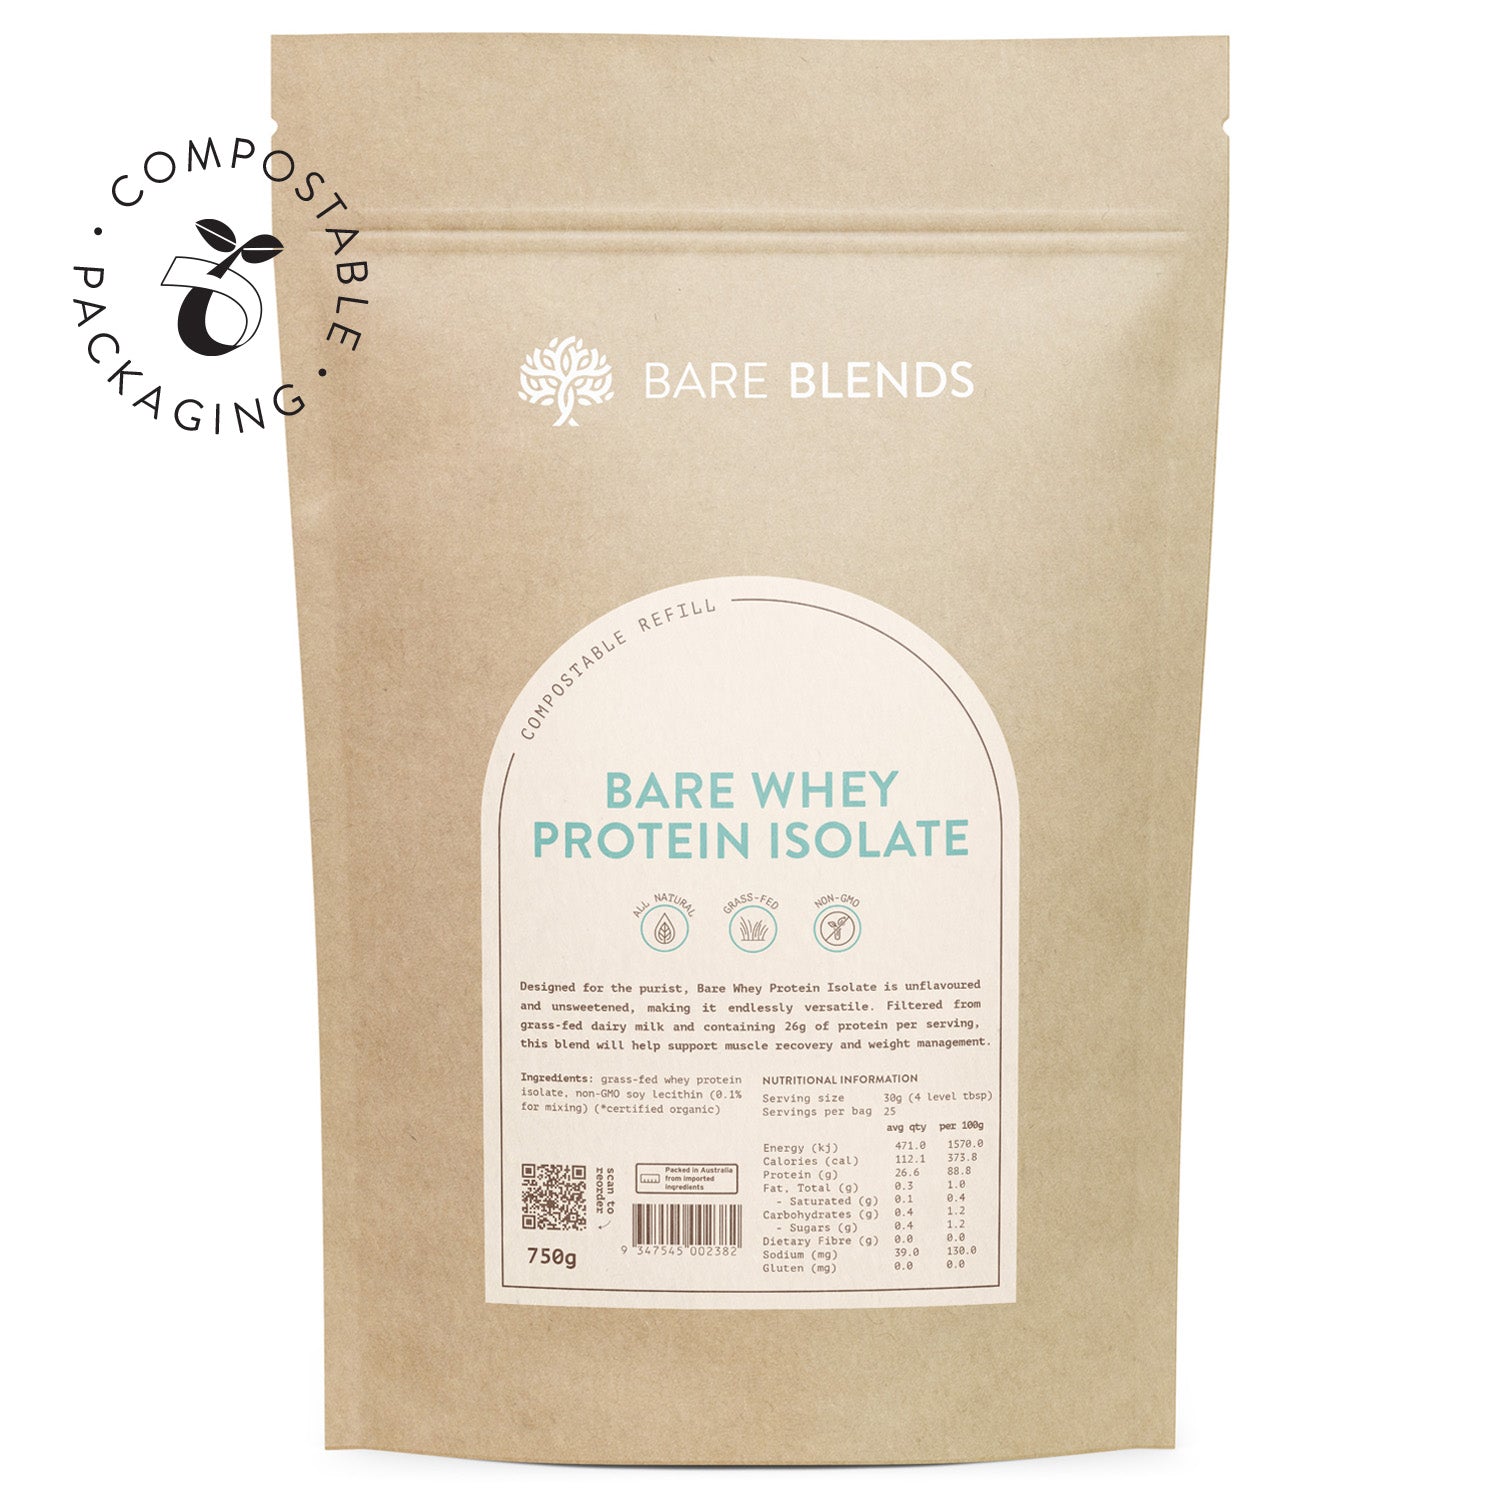 Bare Blends Bare Whey Protein Isolate - Super Nutrition